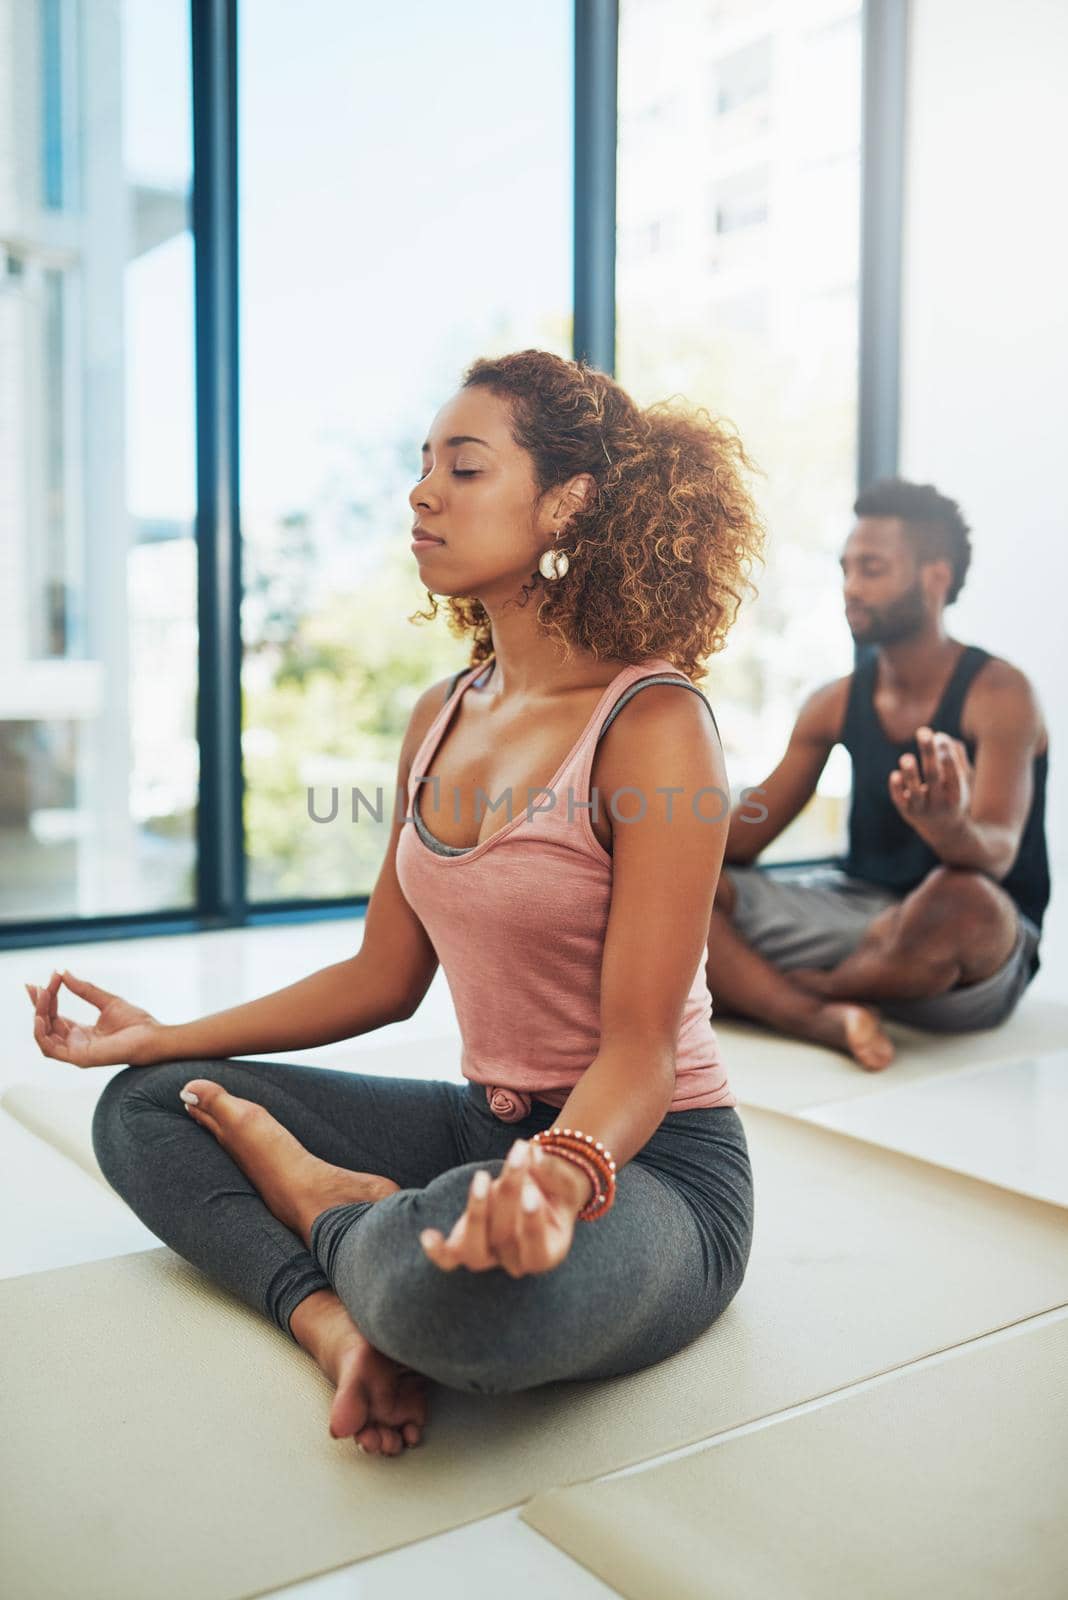 Shot of two people doing yoga together in a studio